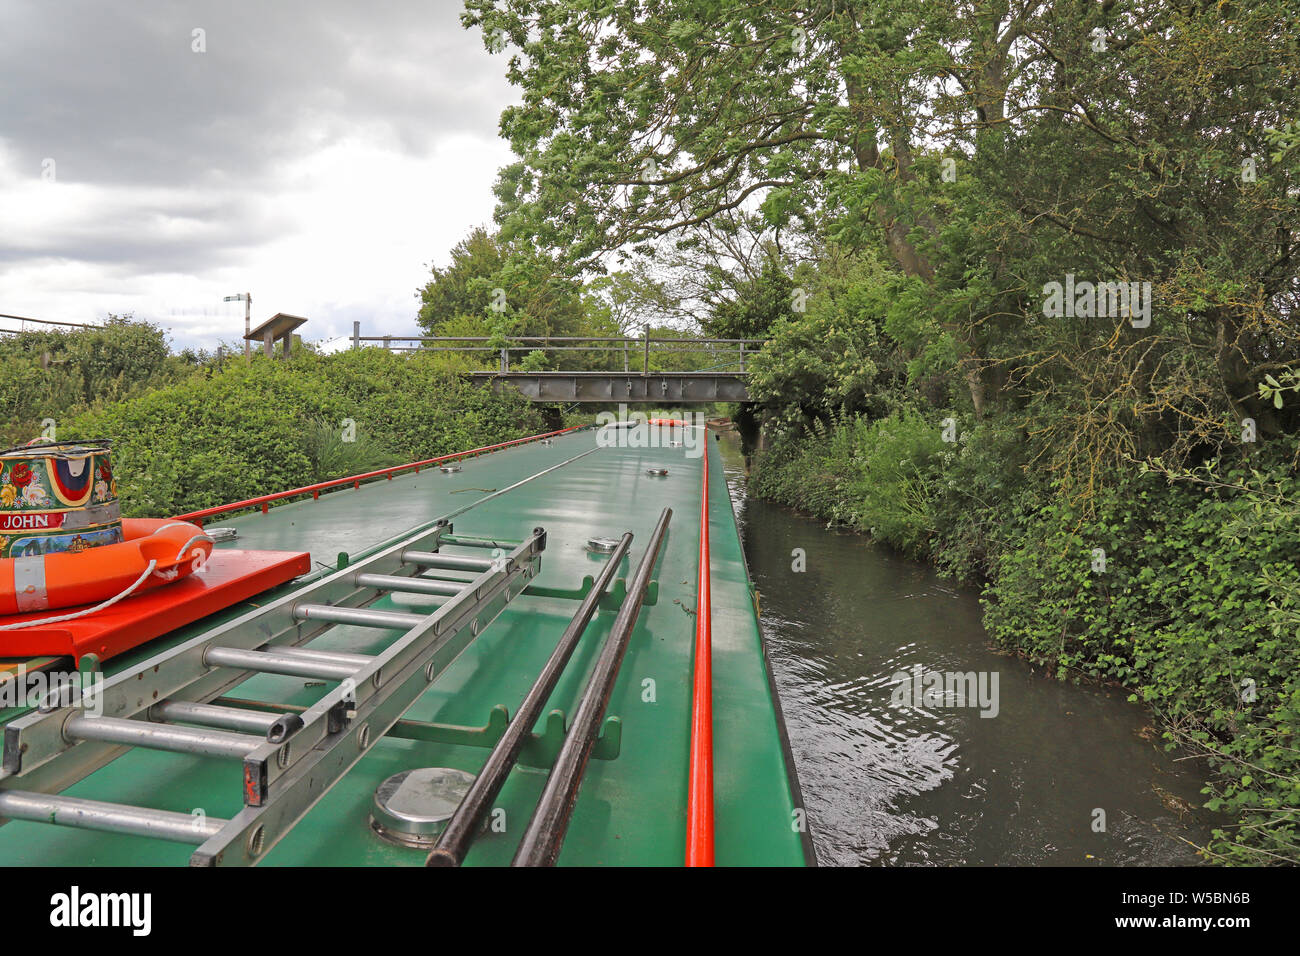 It's a tight fit getting a 68 foot (21 meter) long canal boat under bridges, Basingstoke Canal, UK. Stock Photo